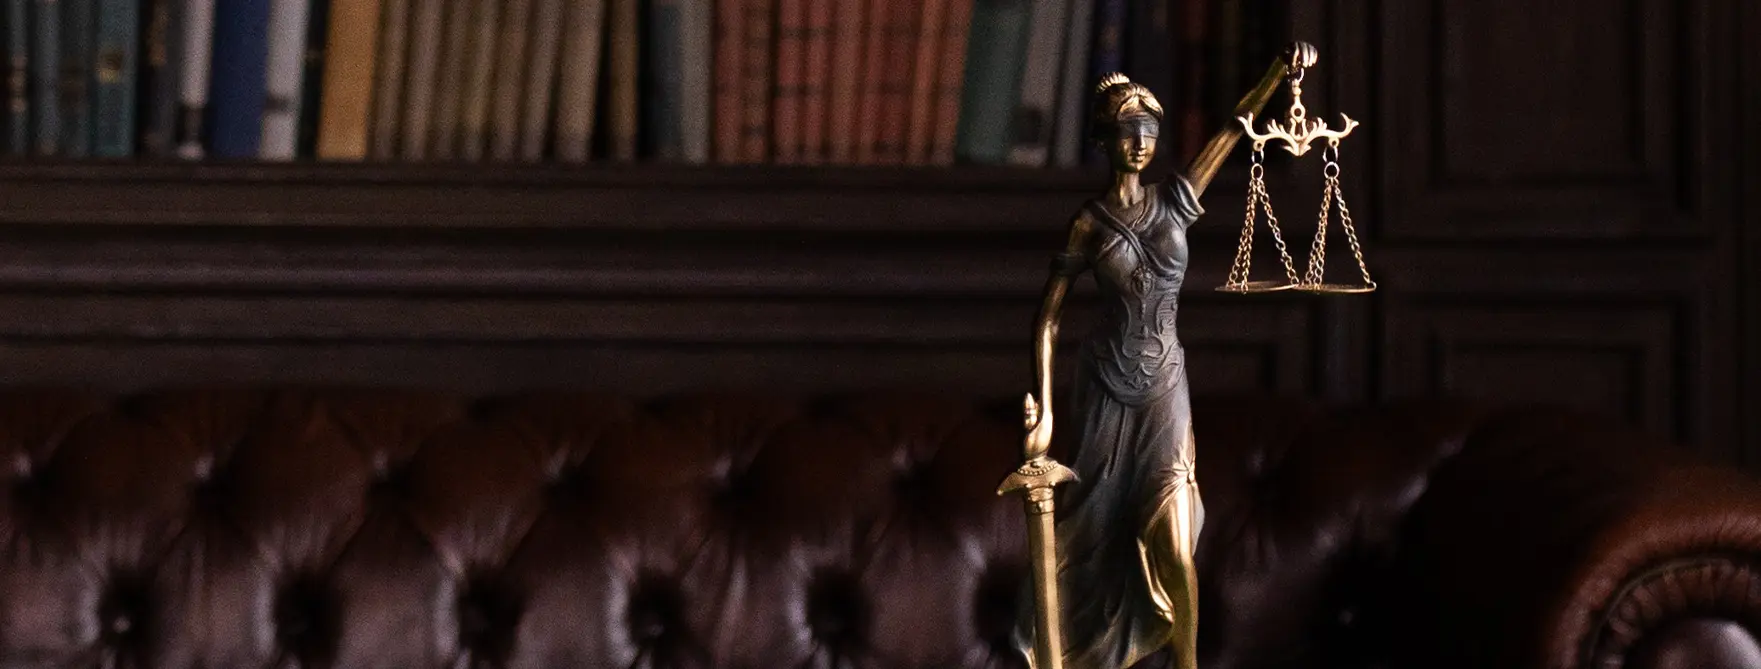 A small statue of Lady Justice in front of a bookshelf